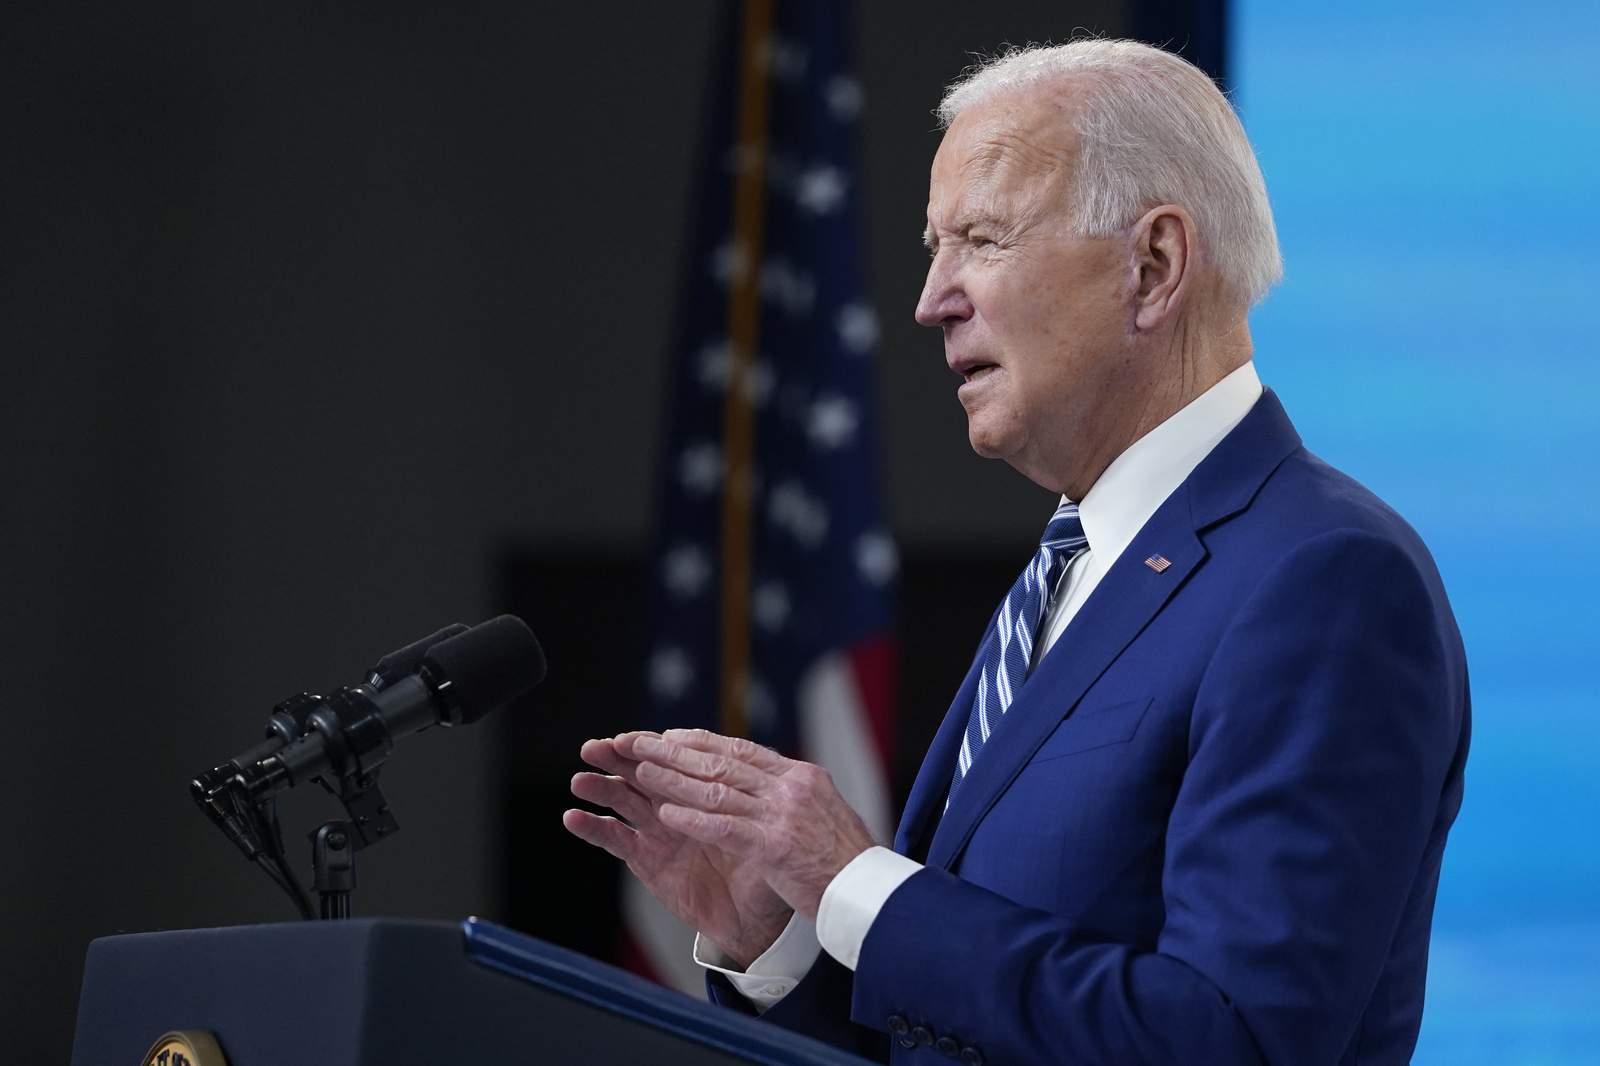 Biden rolls out diverse first slate of judicial nominees